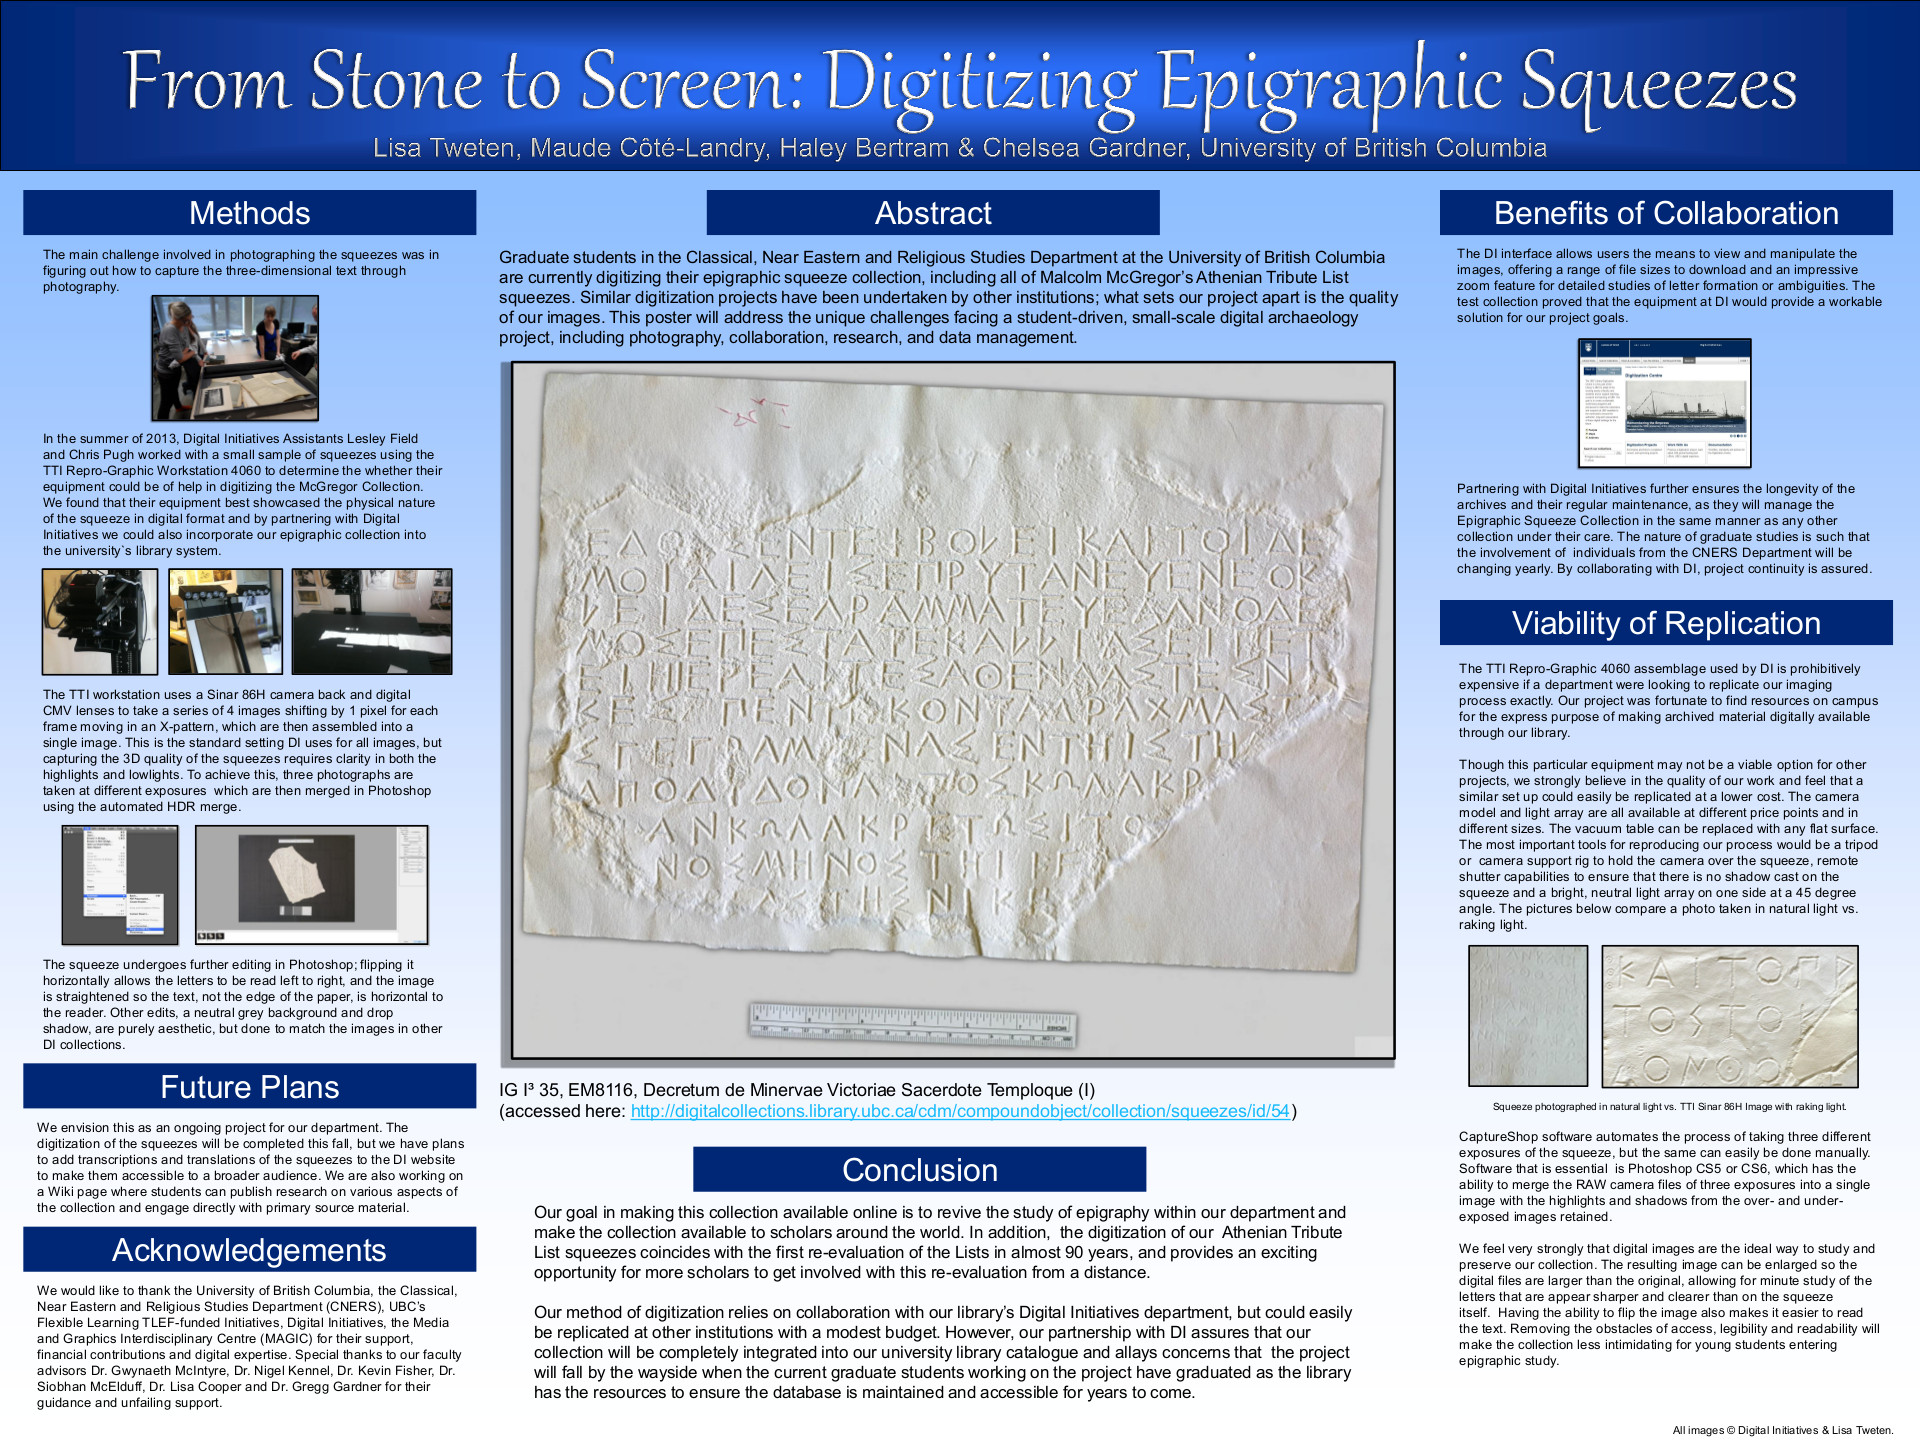 15. From Stone to Screen: Digitizing Epigraphic Squeezes